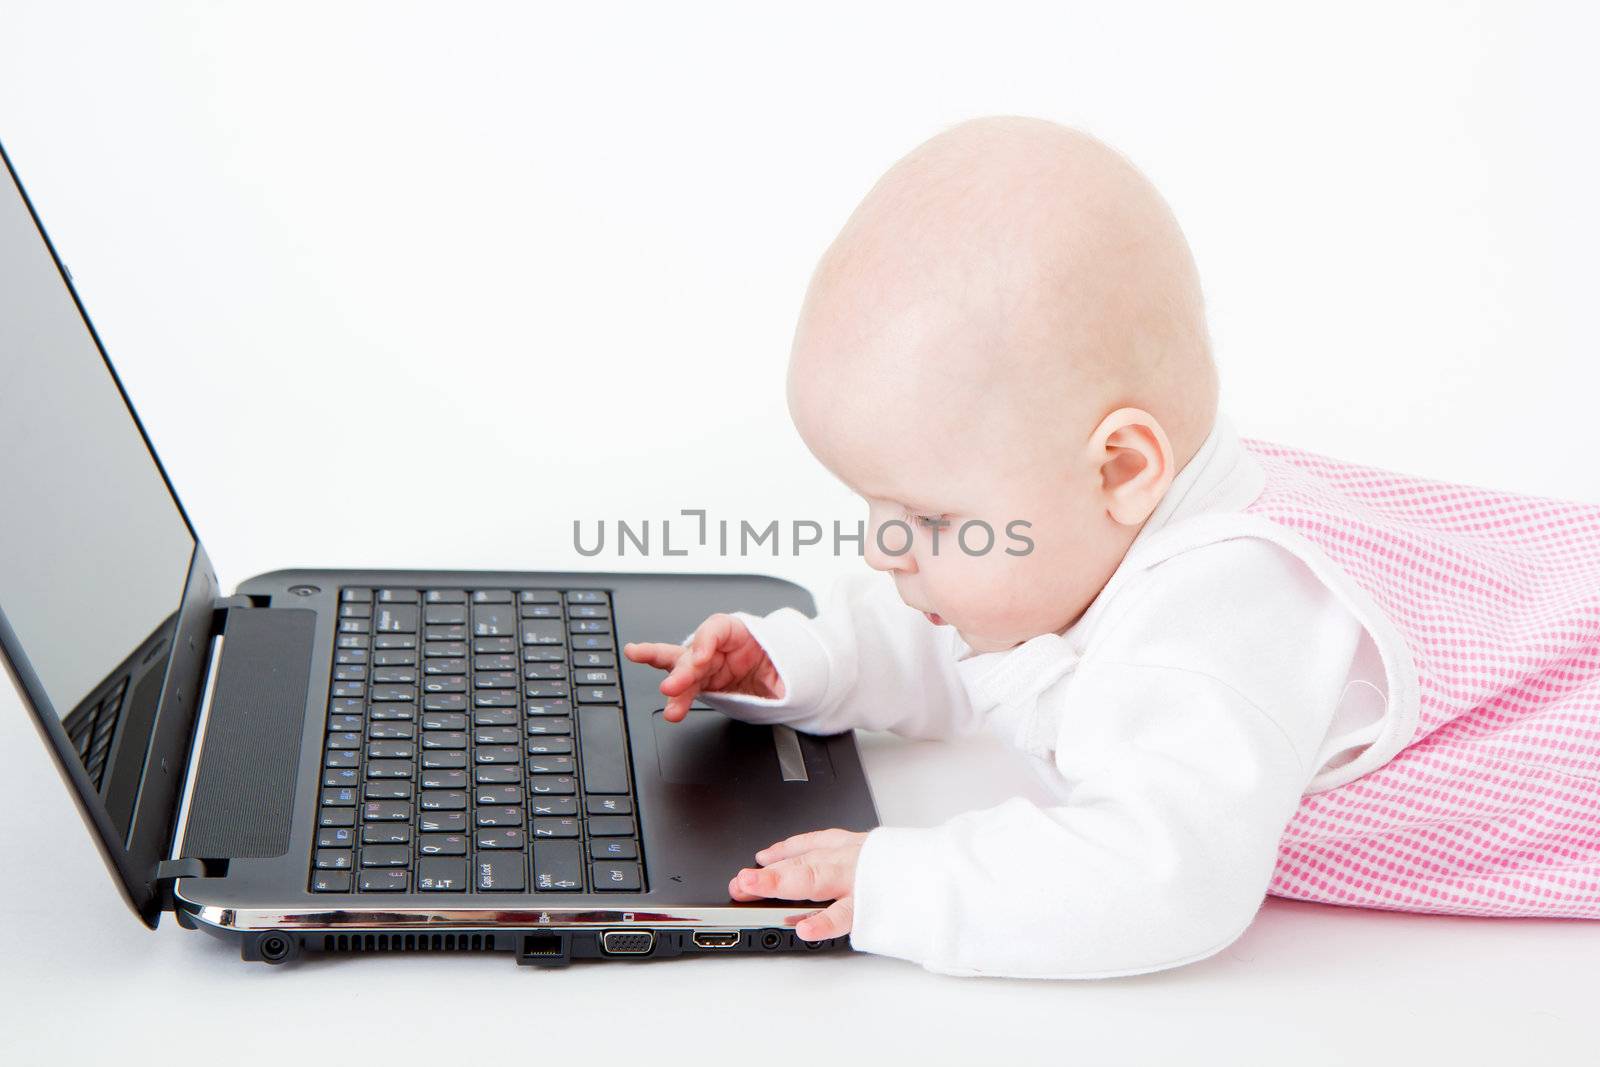 dressed the baby played with a laptop on a white background
